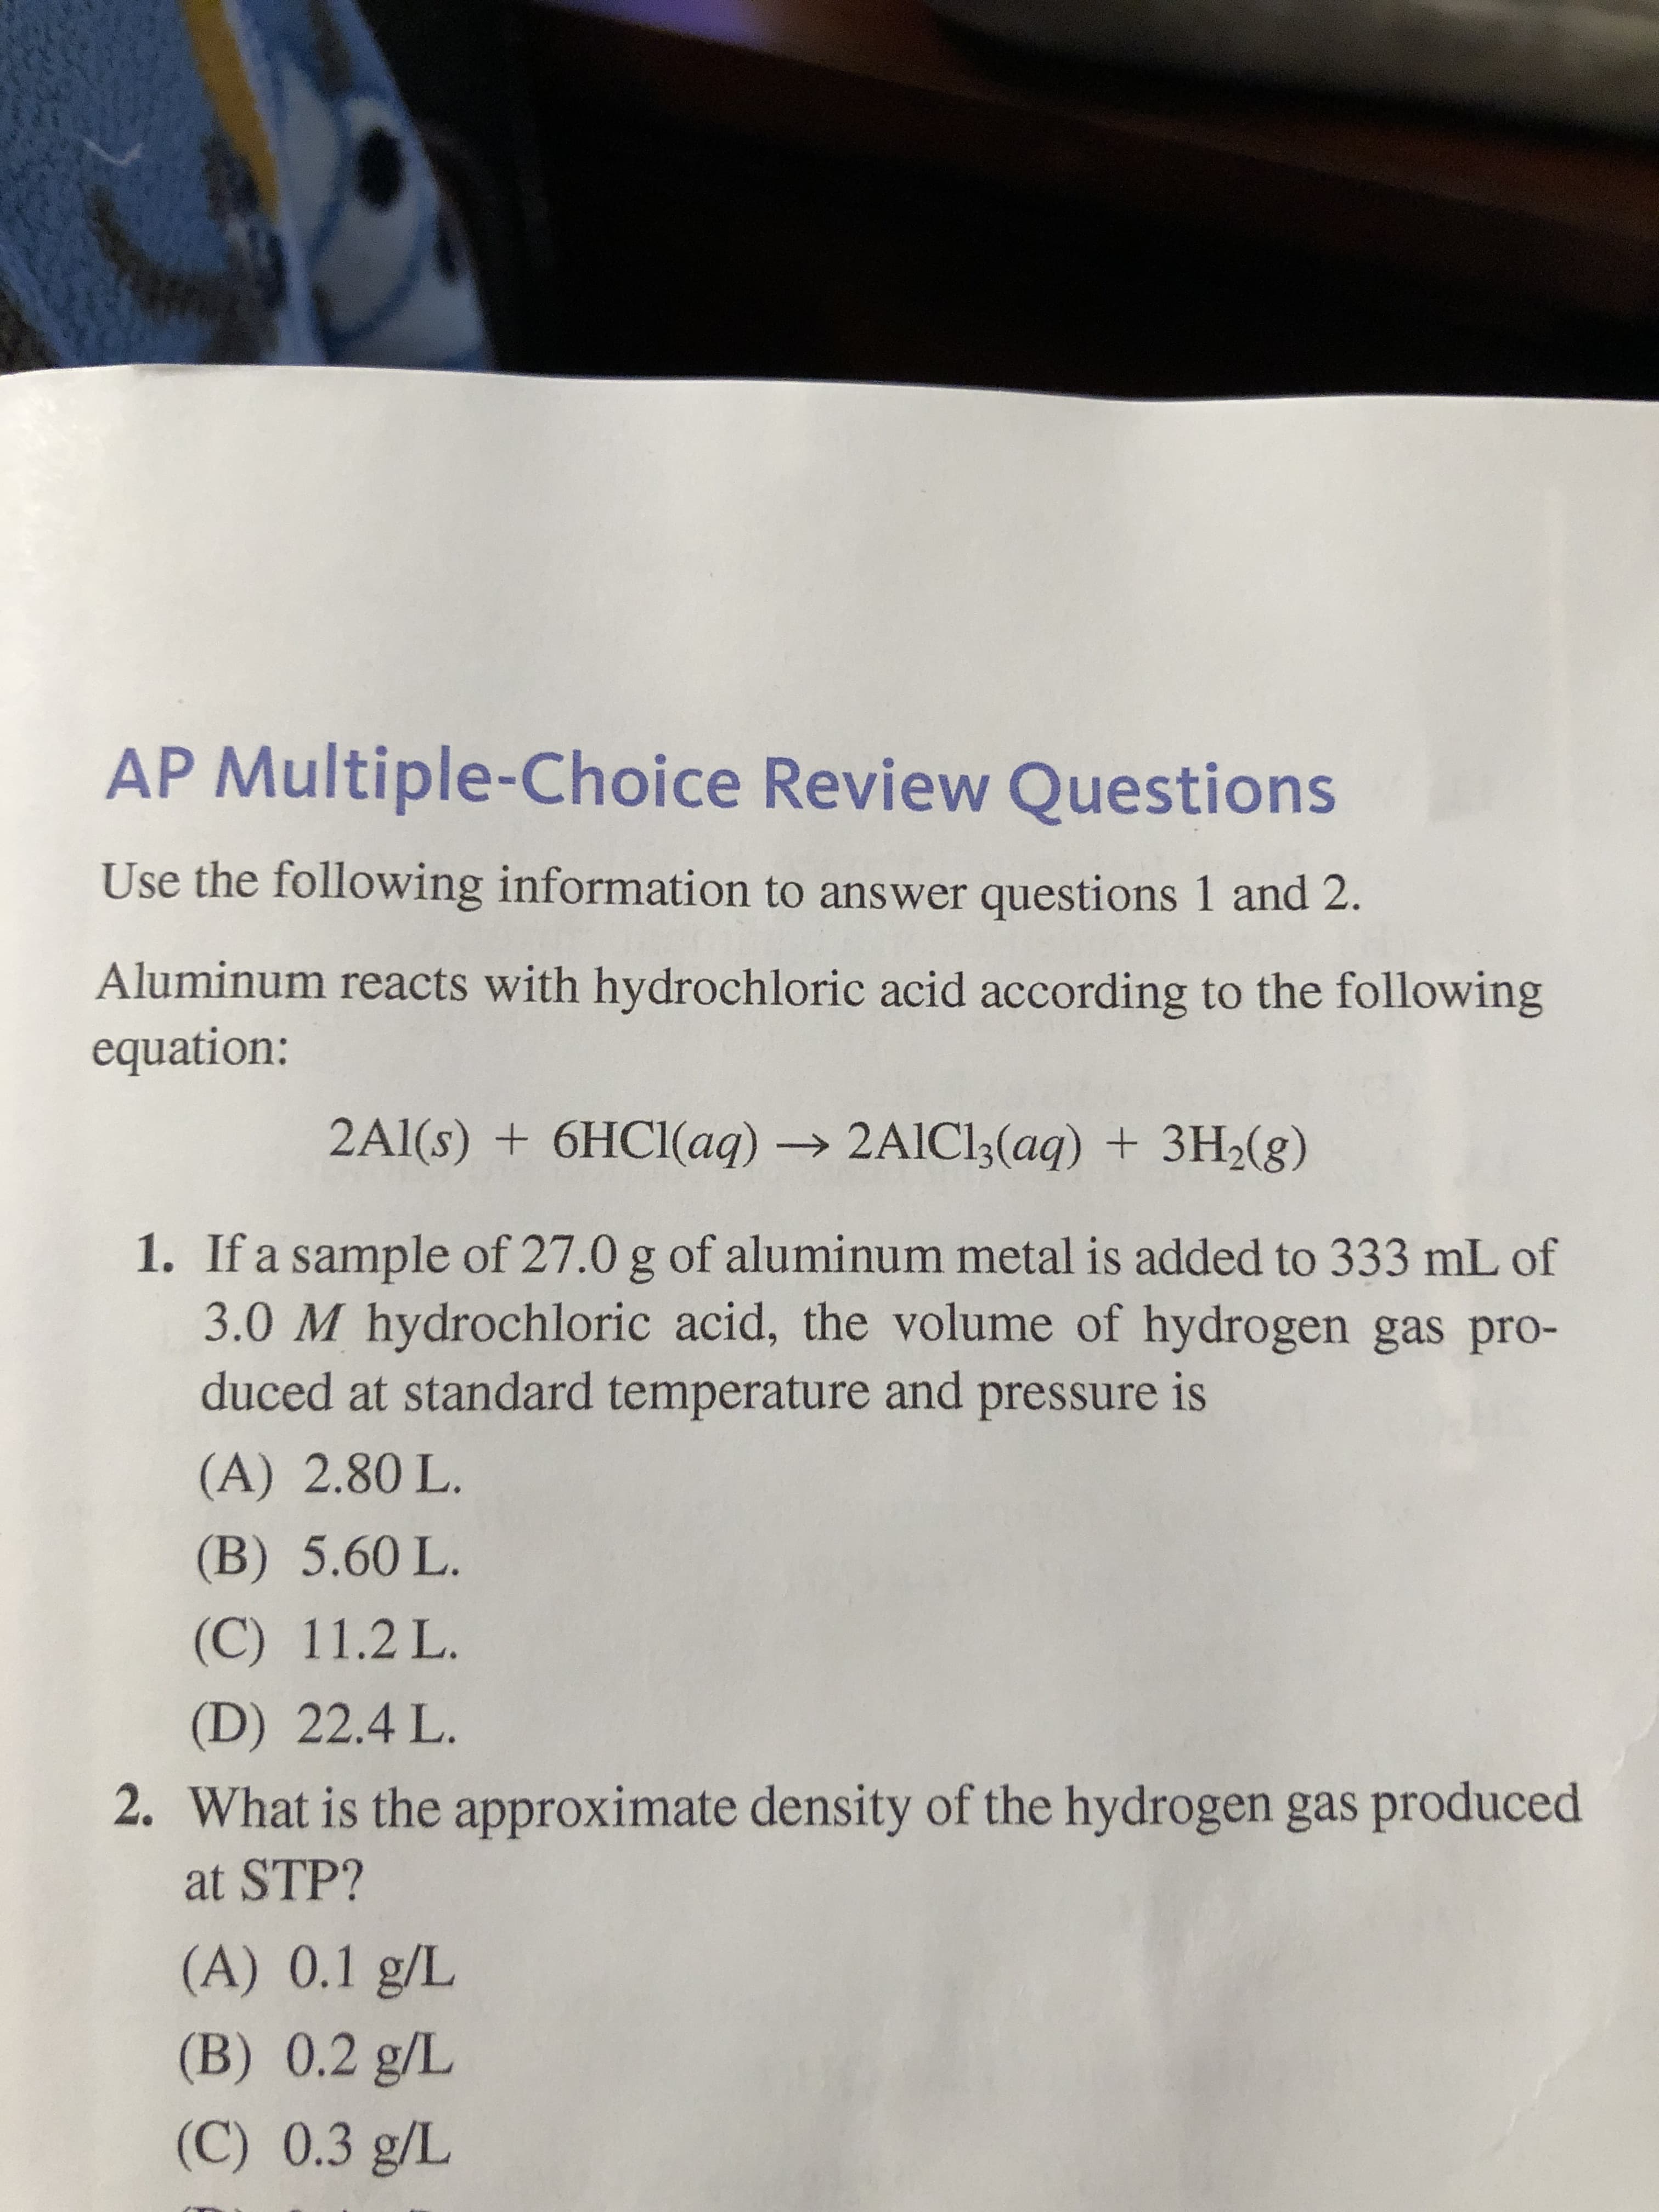 Aluminum reacts with hydrochloric acid according to the following
equation:
2Al(s) + 6HCI(aq) → 2AIC13(aq) + 3H2(g)
1. If a sample of 27.0 g of aluminum metal is added to 333 mL of
3.0 M hydrochloric acid, the volume of hydrogen gas pro-
duced at standard temperature and pressure
is
(A) 2.80 L.
(B) 5.60 L.
(C) 11.2 L.
(D) 22.4 L.
